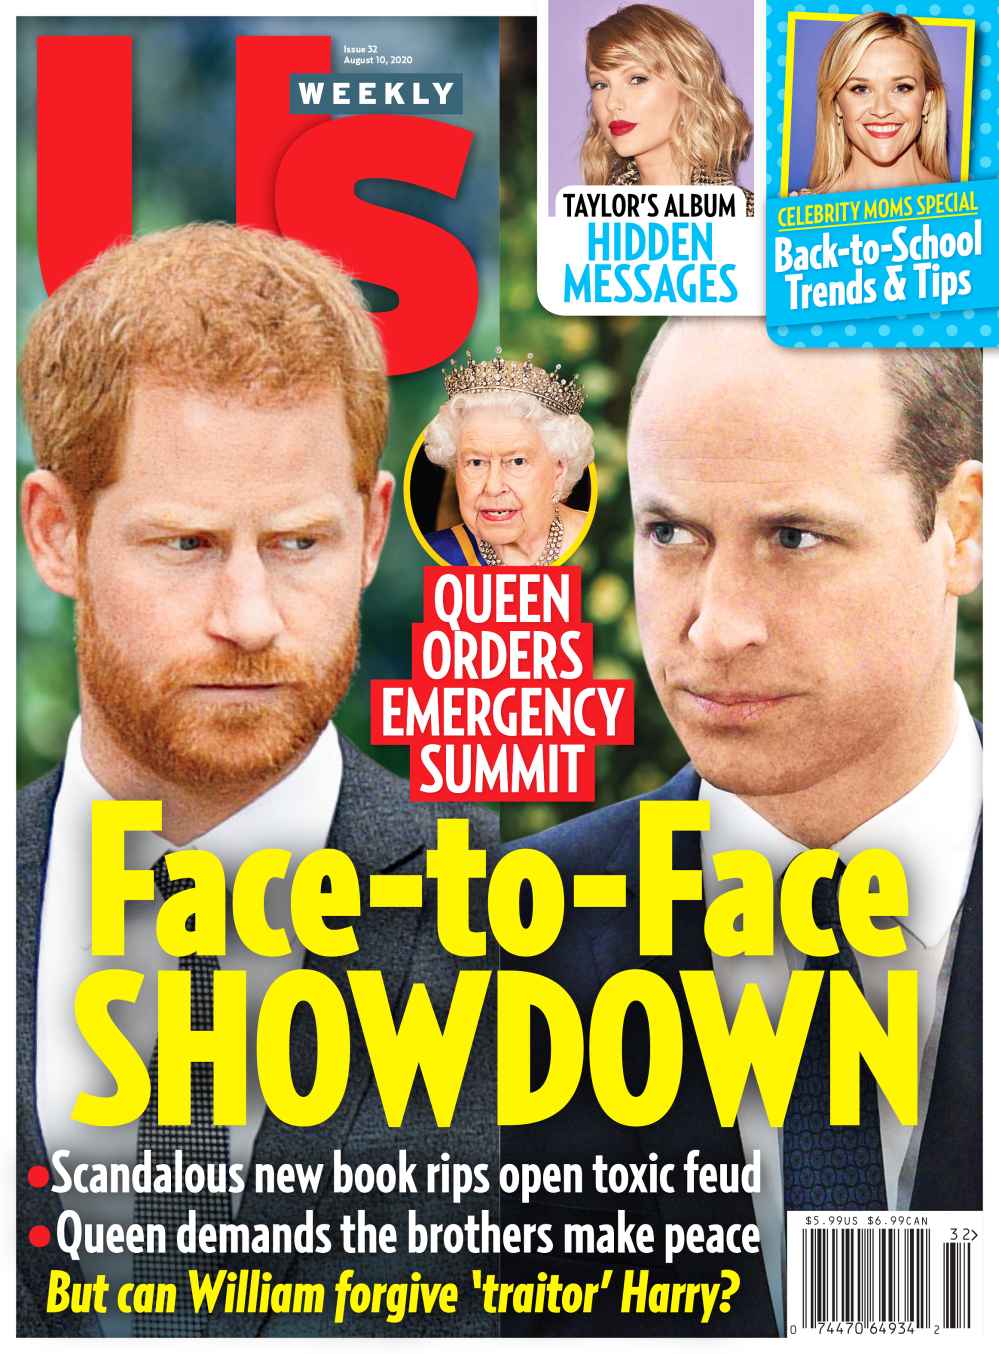 Us Weekly Issue 3220 Cover Prince Harry vs Prince William